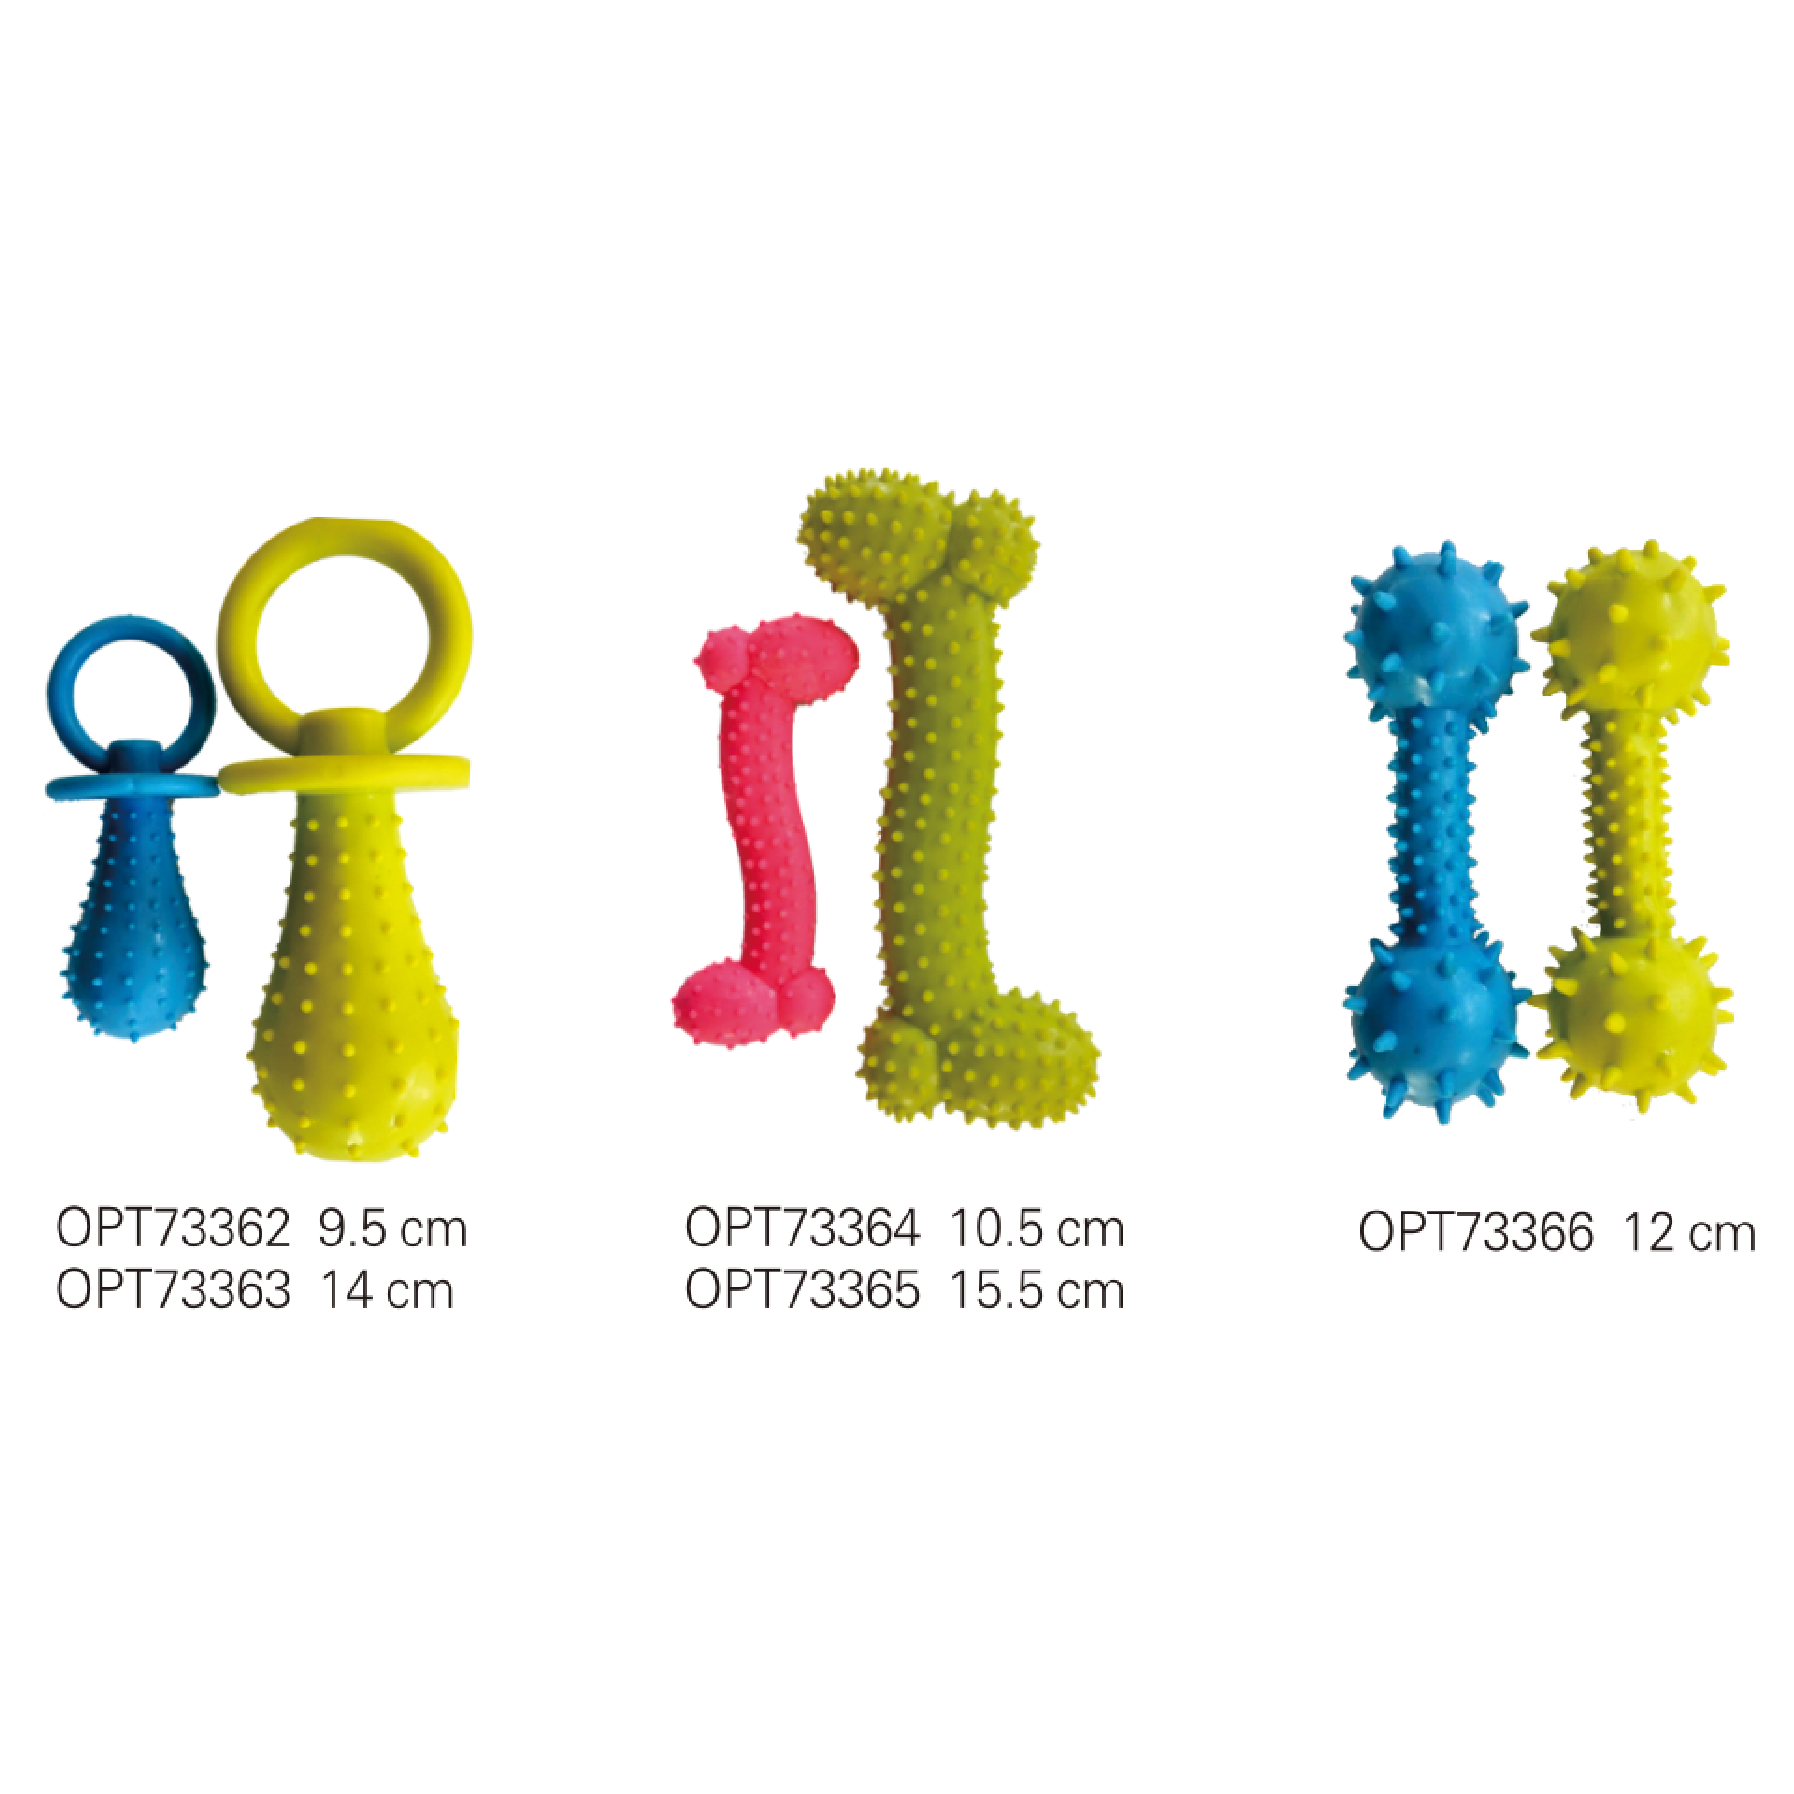 OPT73362-OPT73366 Dog toy rubber